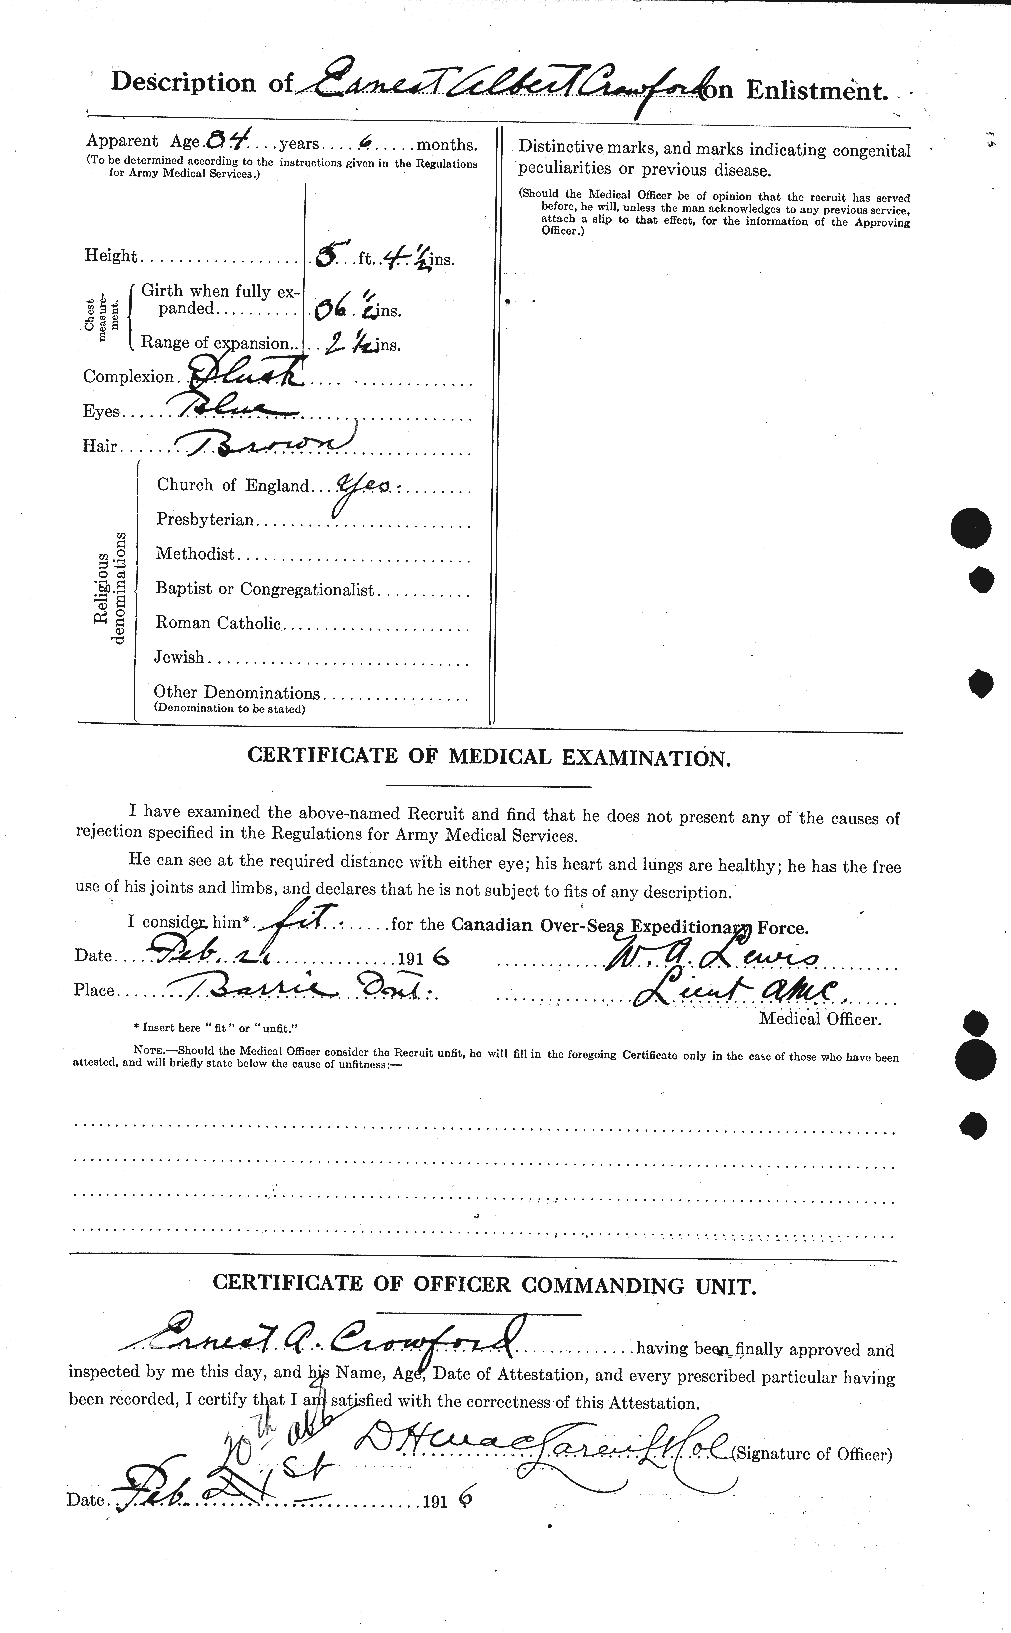 Personnel Records of the First World War - CEF 060808b